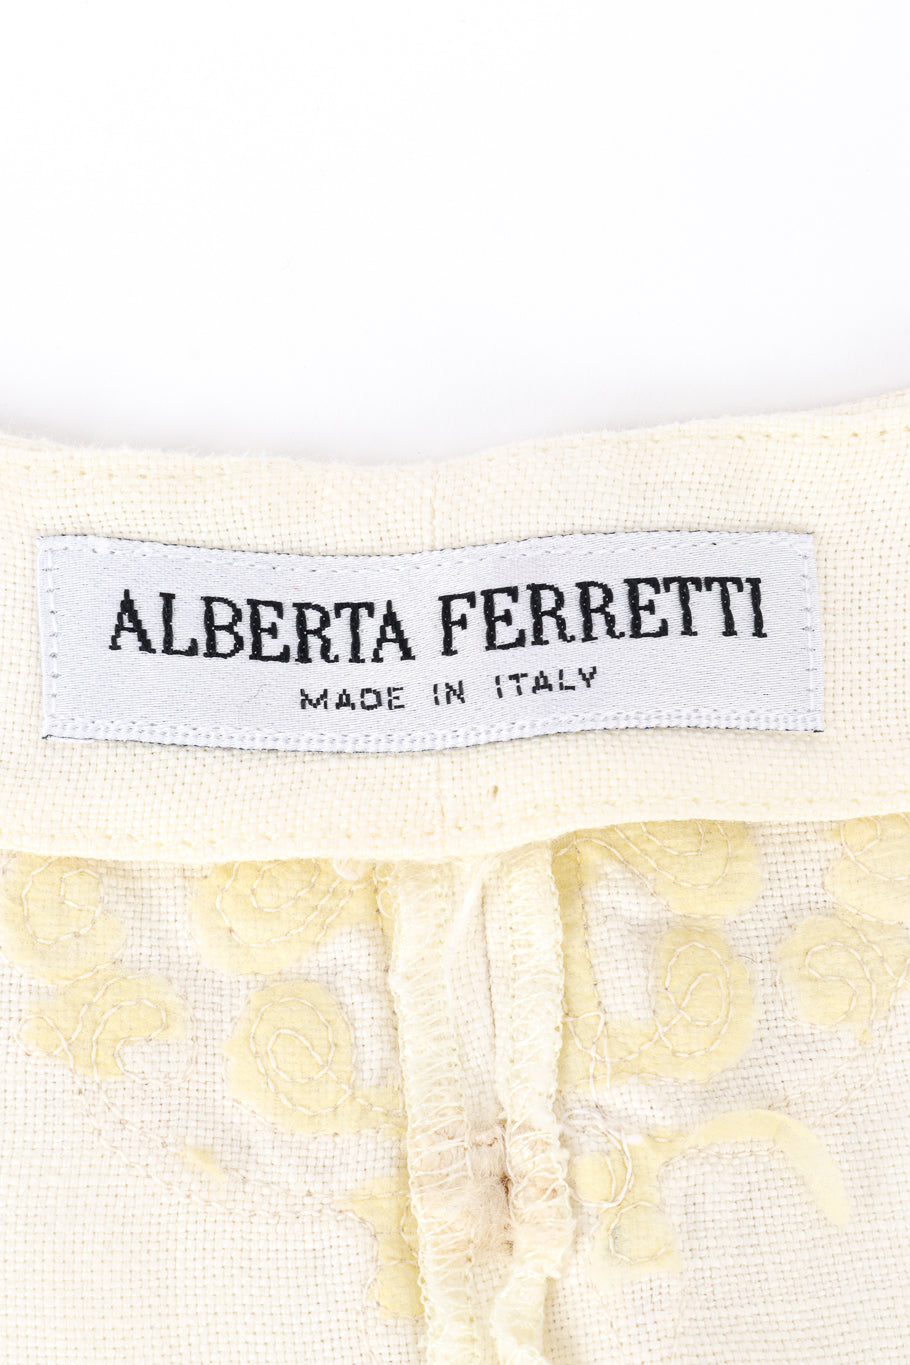 Vintage Alberta Ferretti woven linen embroidered cream mock tunic vest and pant twin set  close up on the makers label found inside the mock tunic vest  @Recess LA